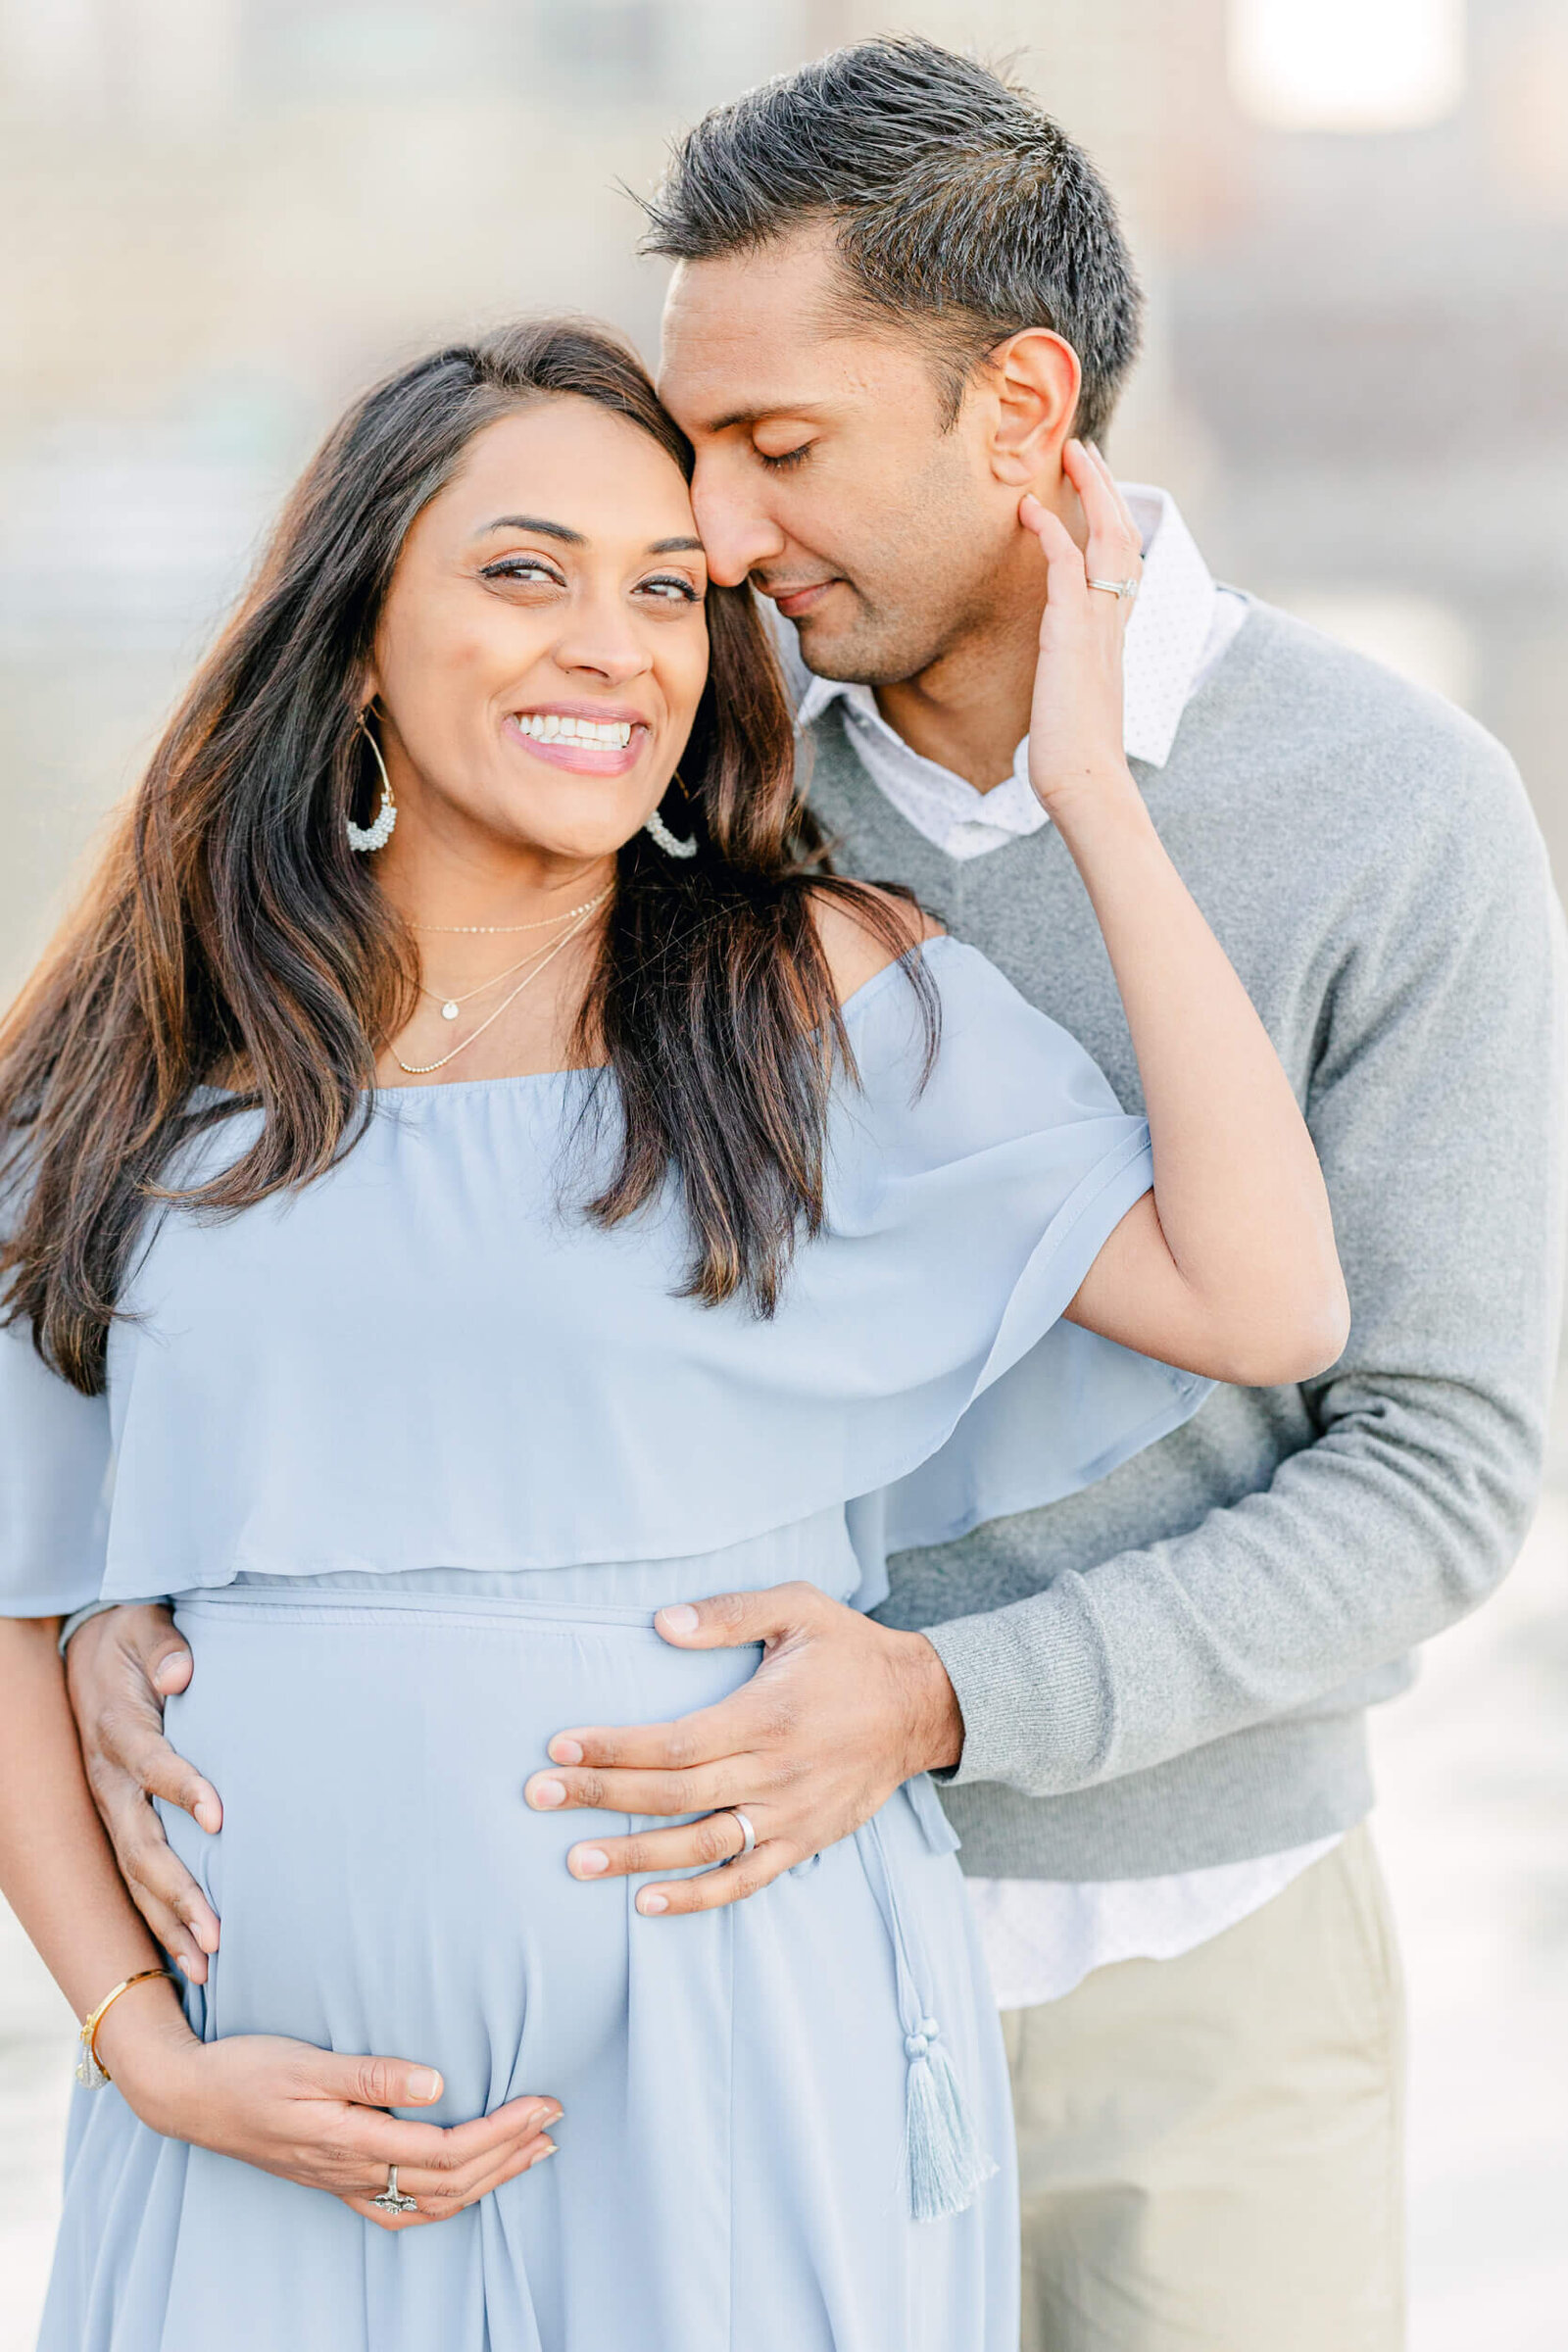 Pregnant woman smiles as her husband leans in and holds her baby bump